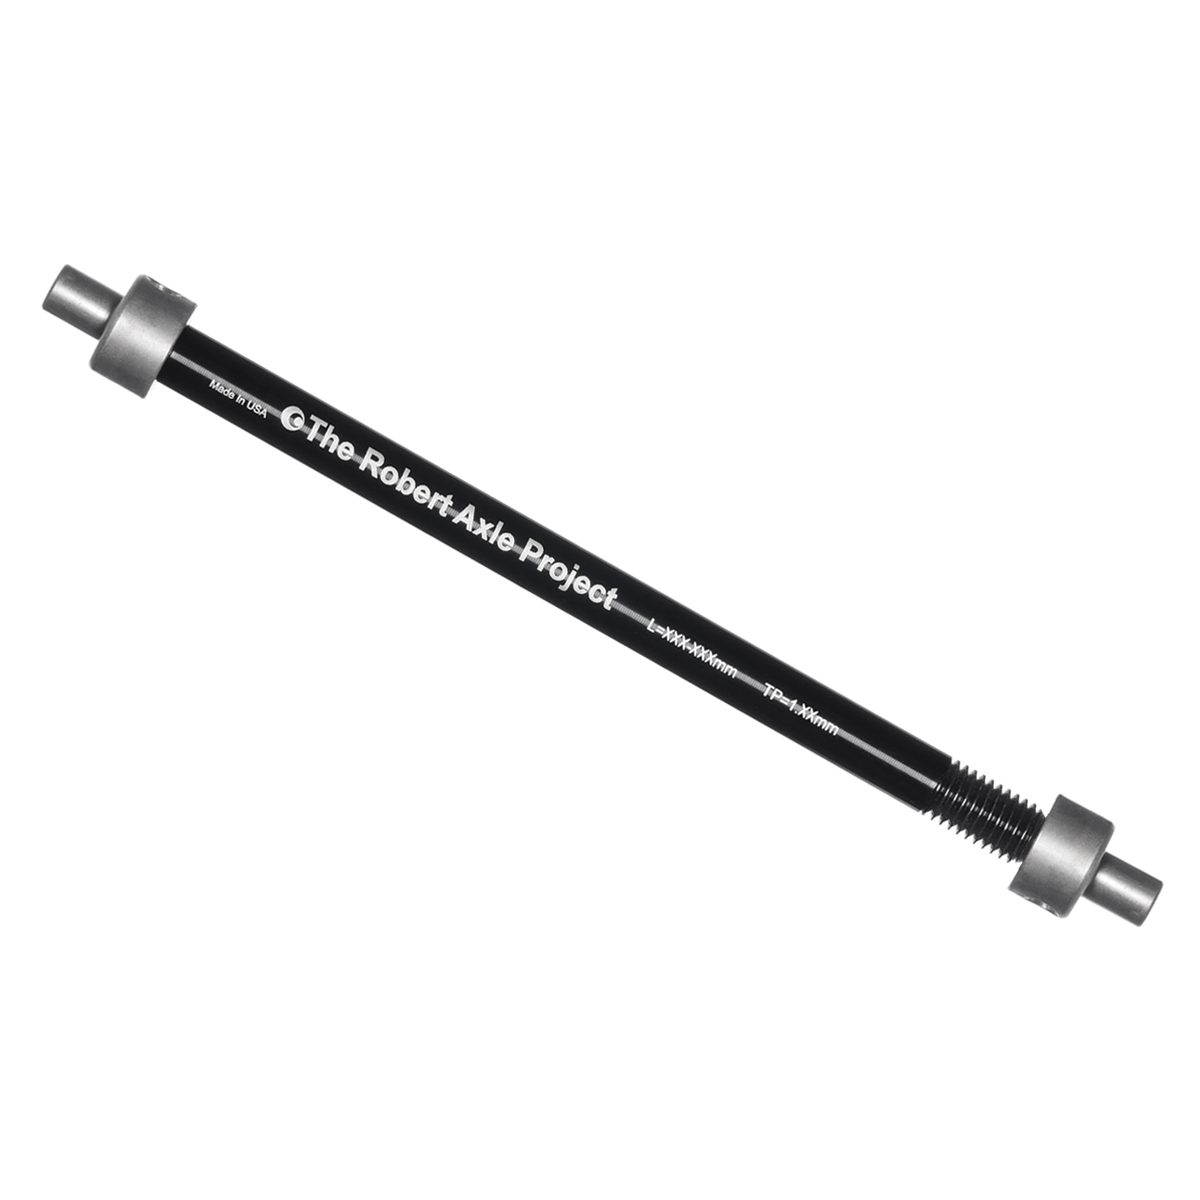 12mm rear axle for mounting a bike cargo rack